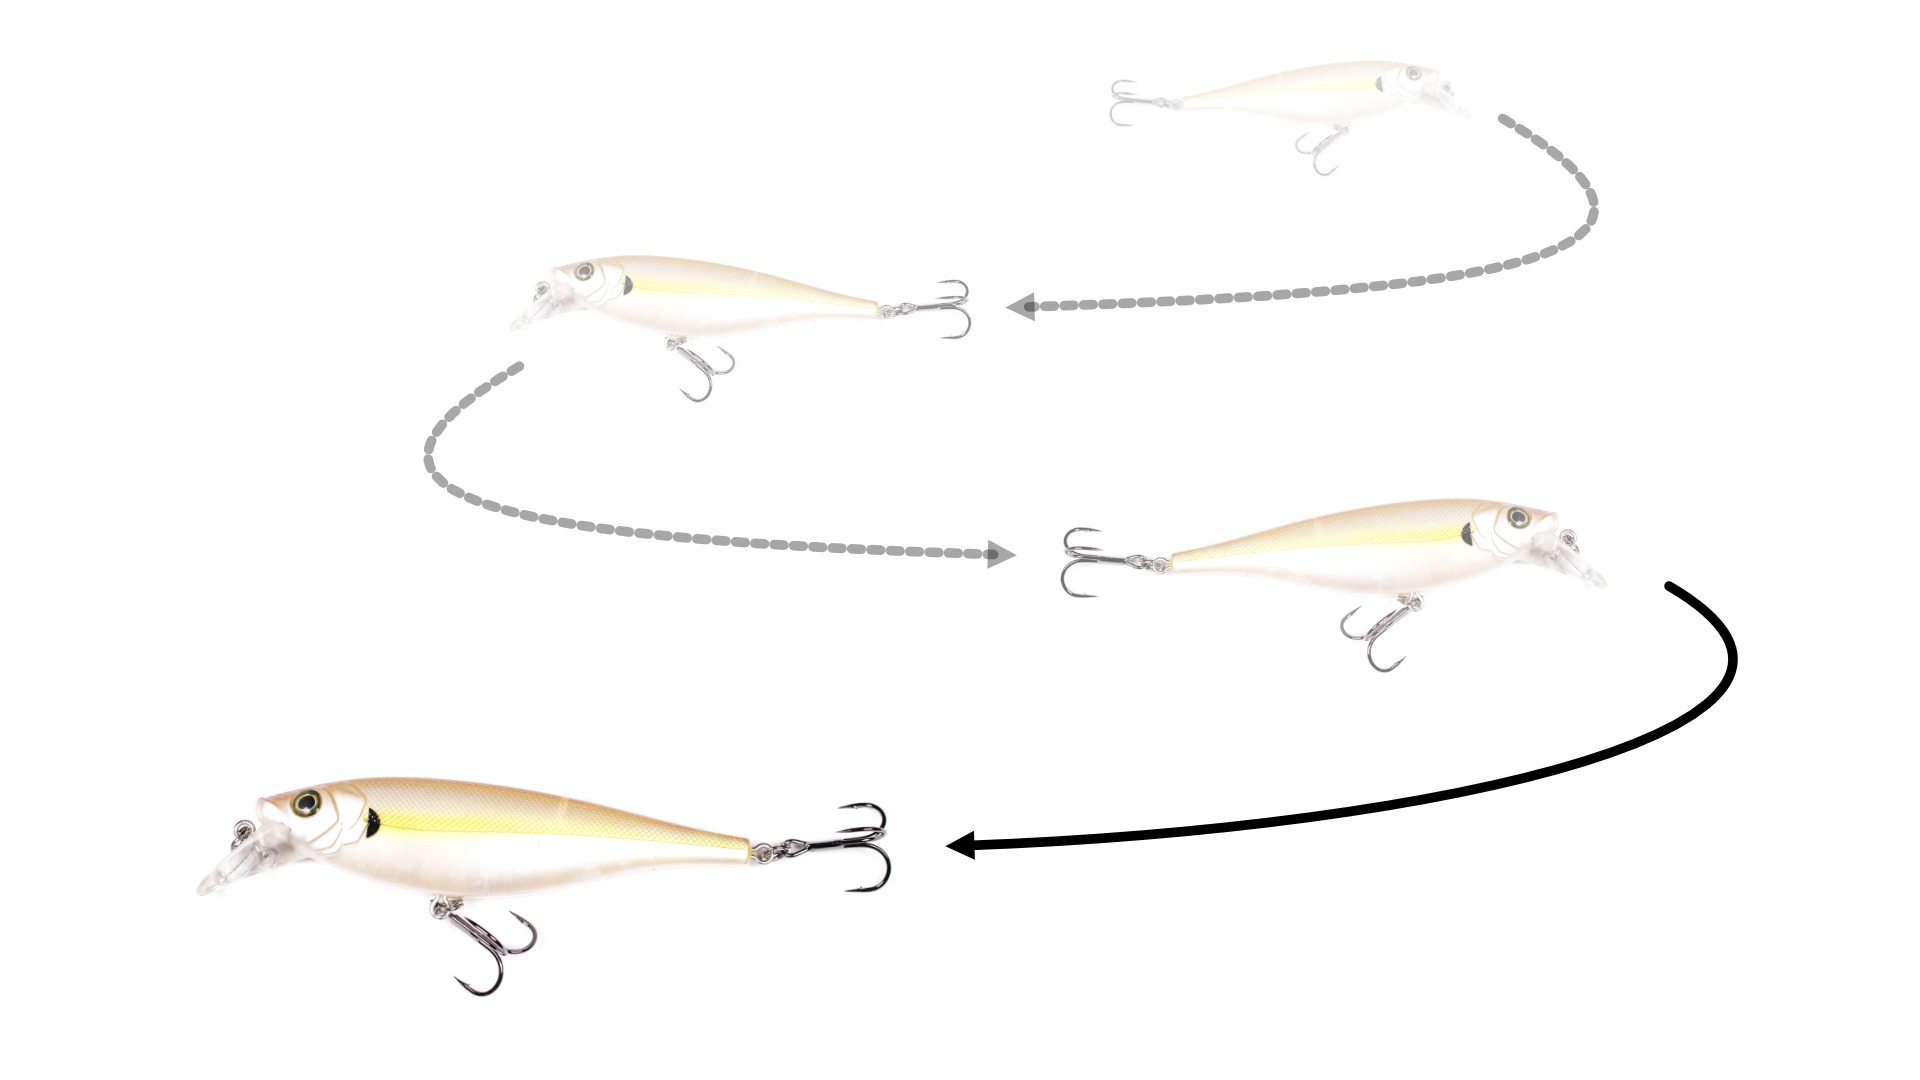 Crank Bait vs Jerk Bait: What's the Difference? PLUS When & How to Use